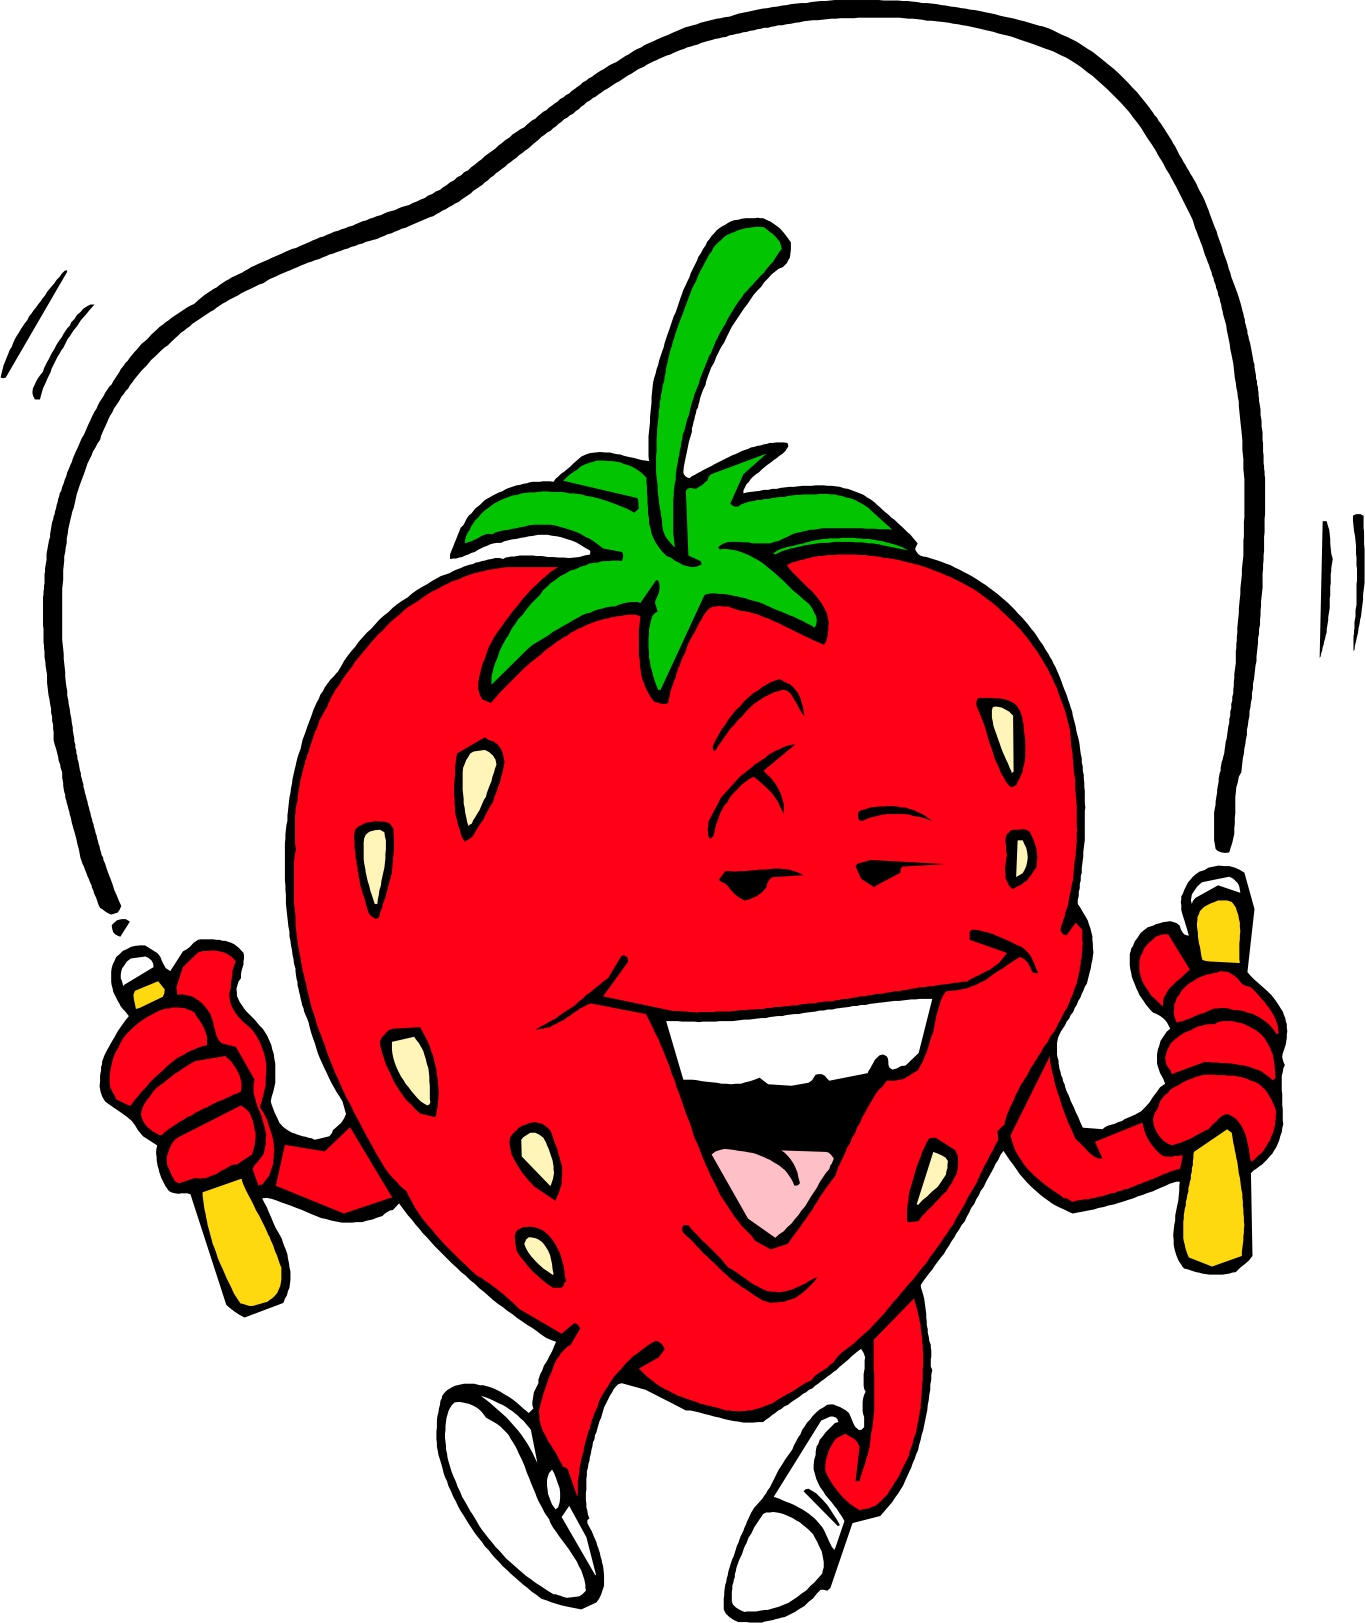 animated strawberry clipart - photo #49